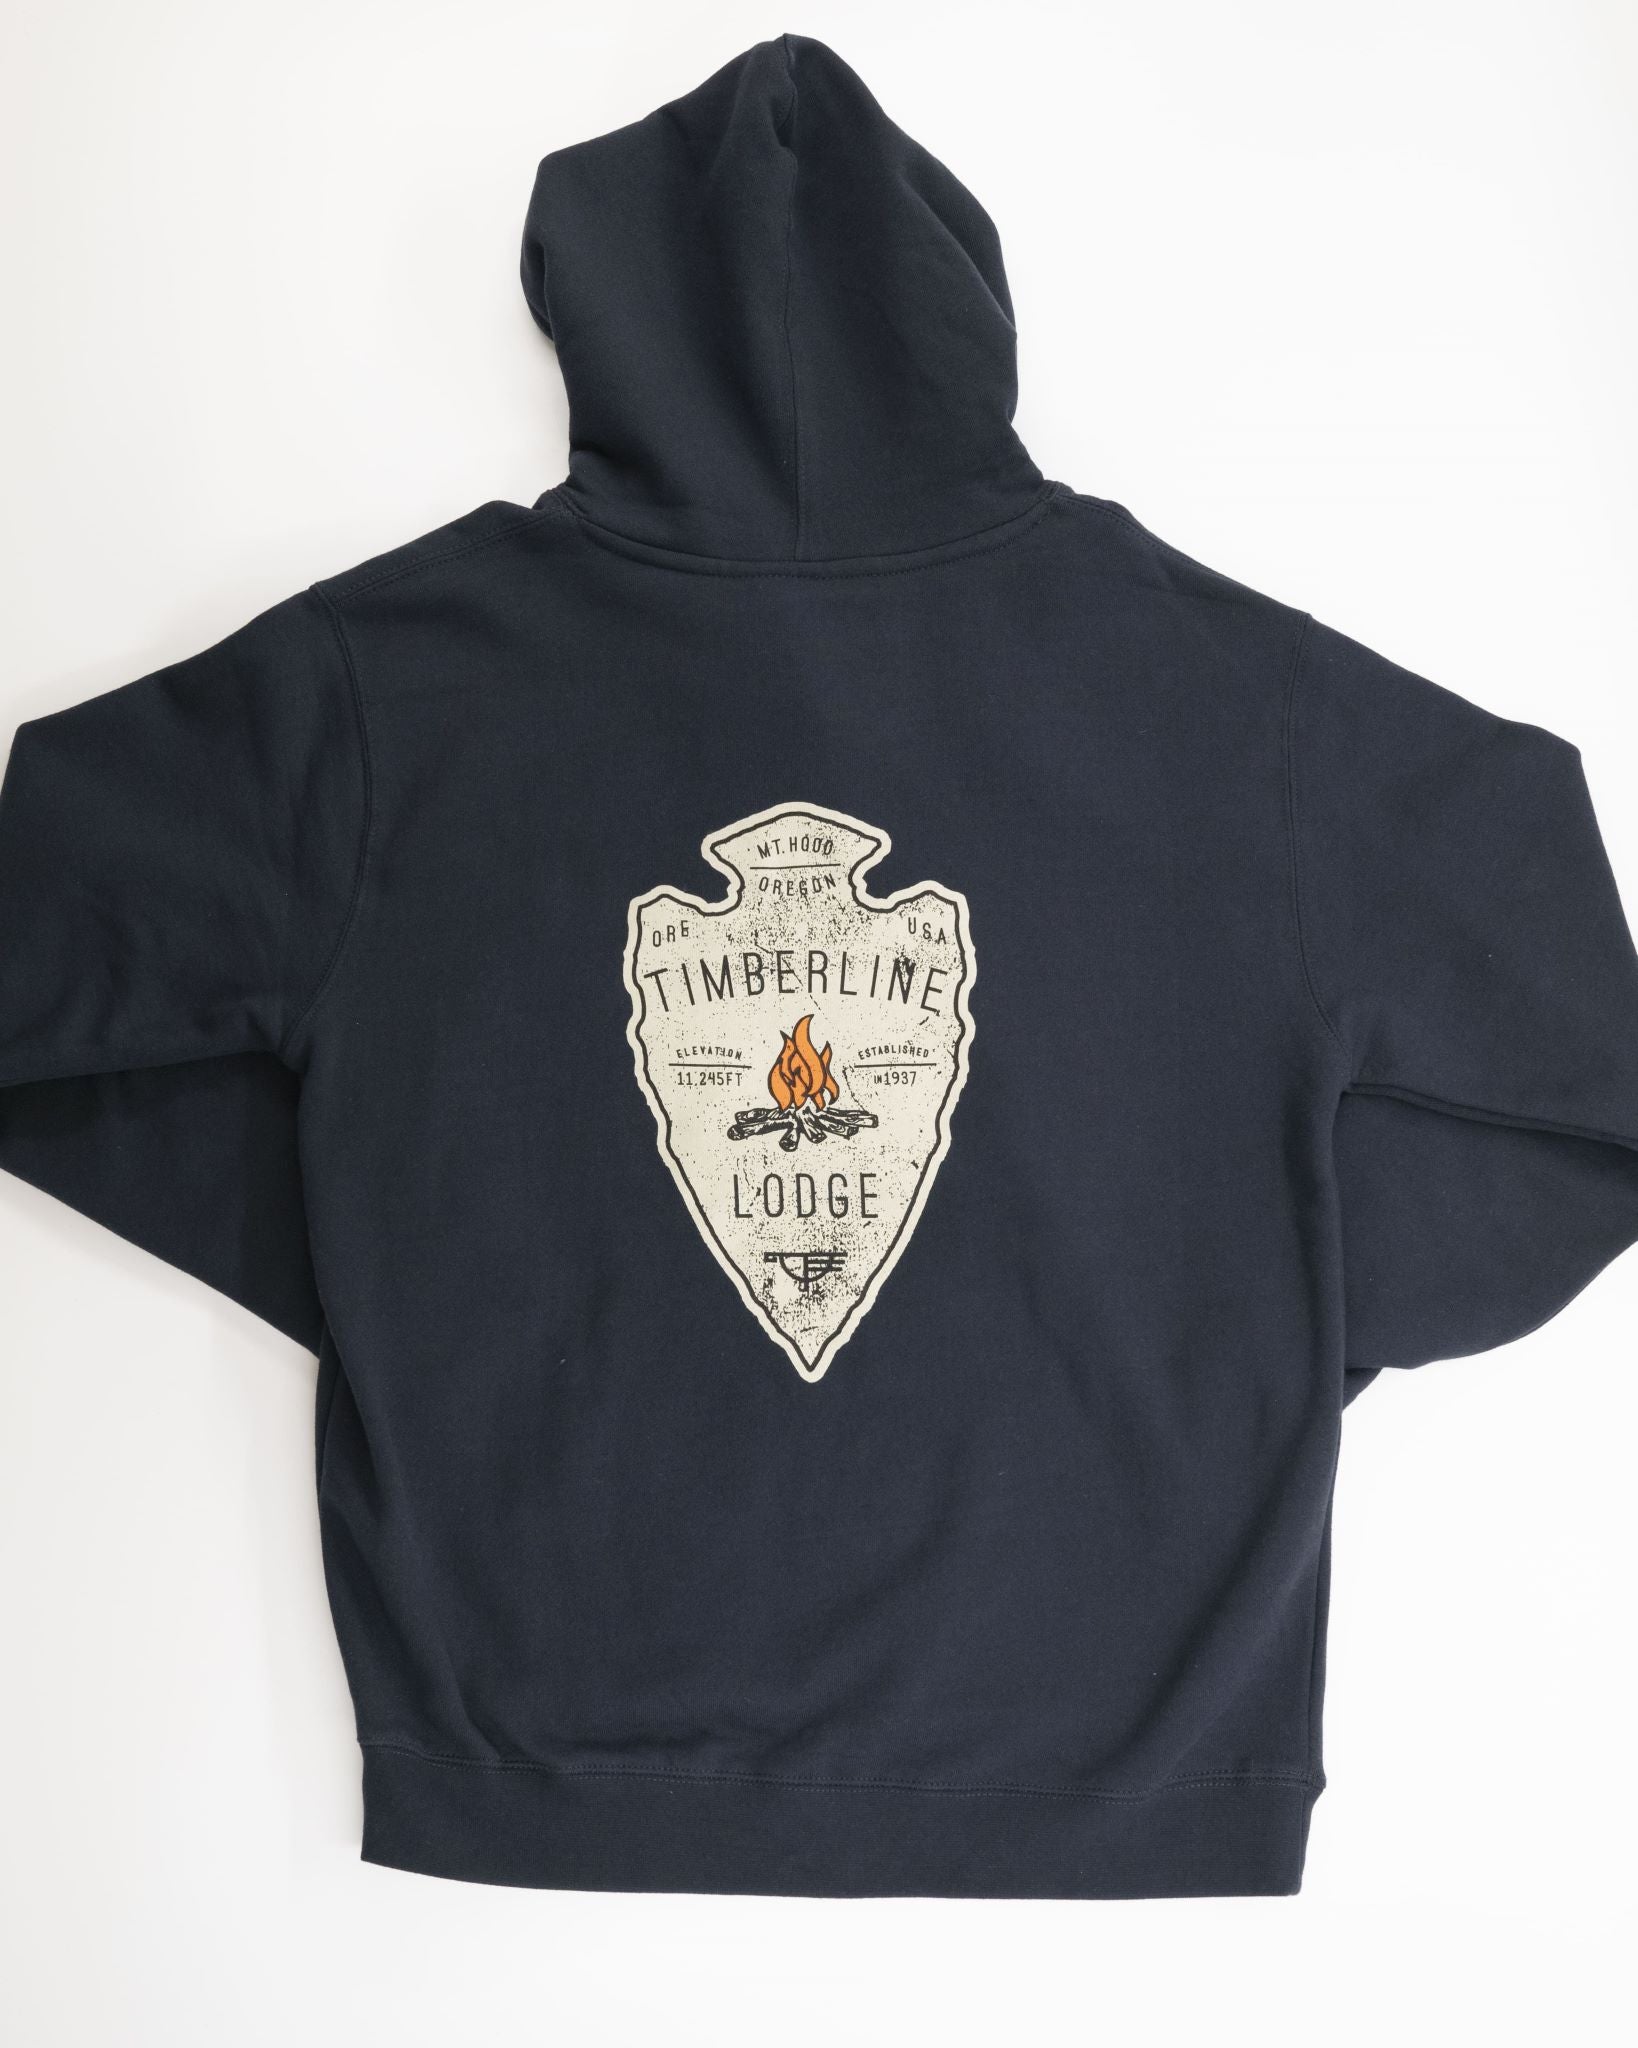 Navy Blue Sweatshirt with an arrowhead shaped logo. There is a fire in the middle of the arrowhead and Timberline Lodge is written above and below the camp fire.